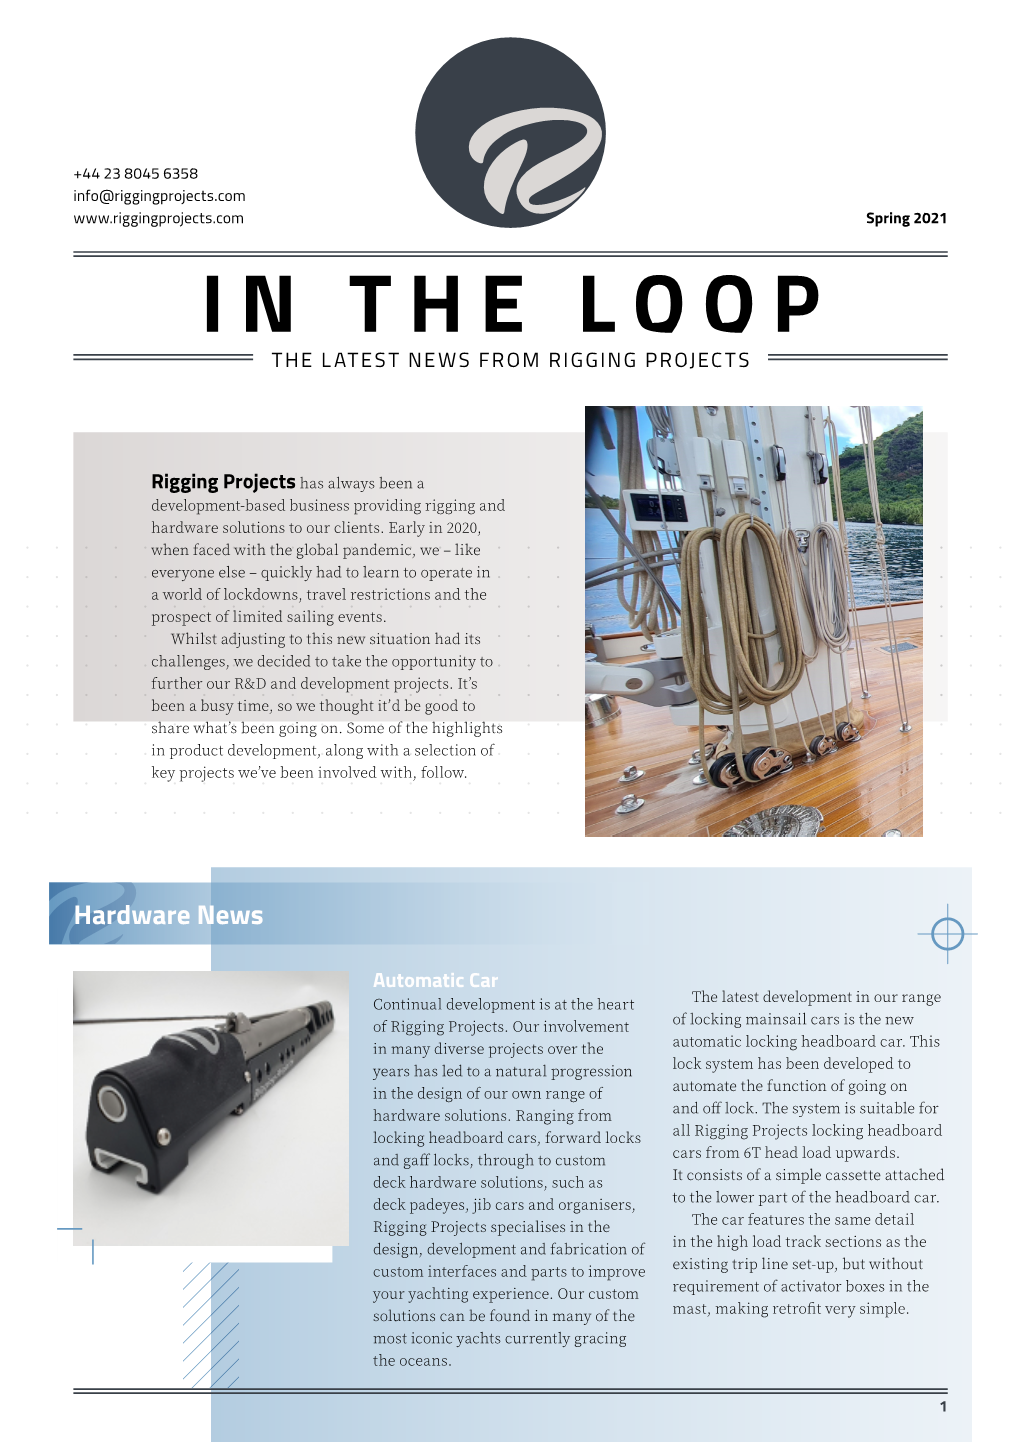 In the Loop the Latest News from Rigging Projects